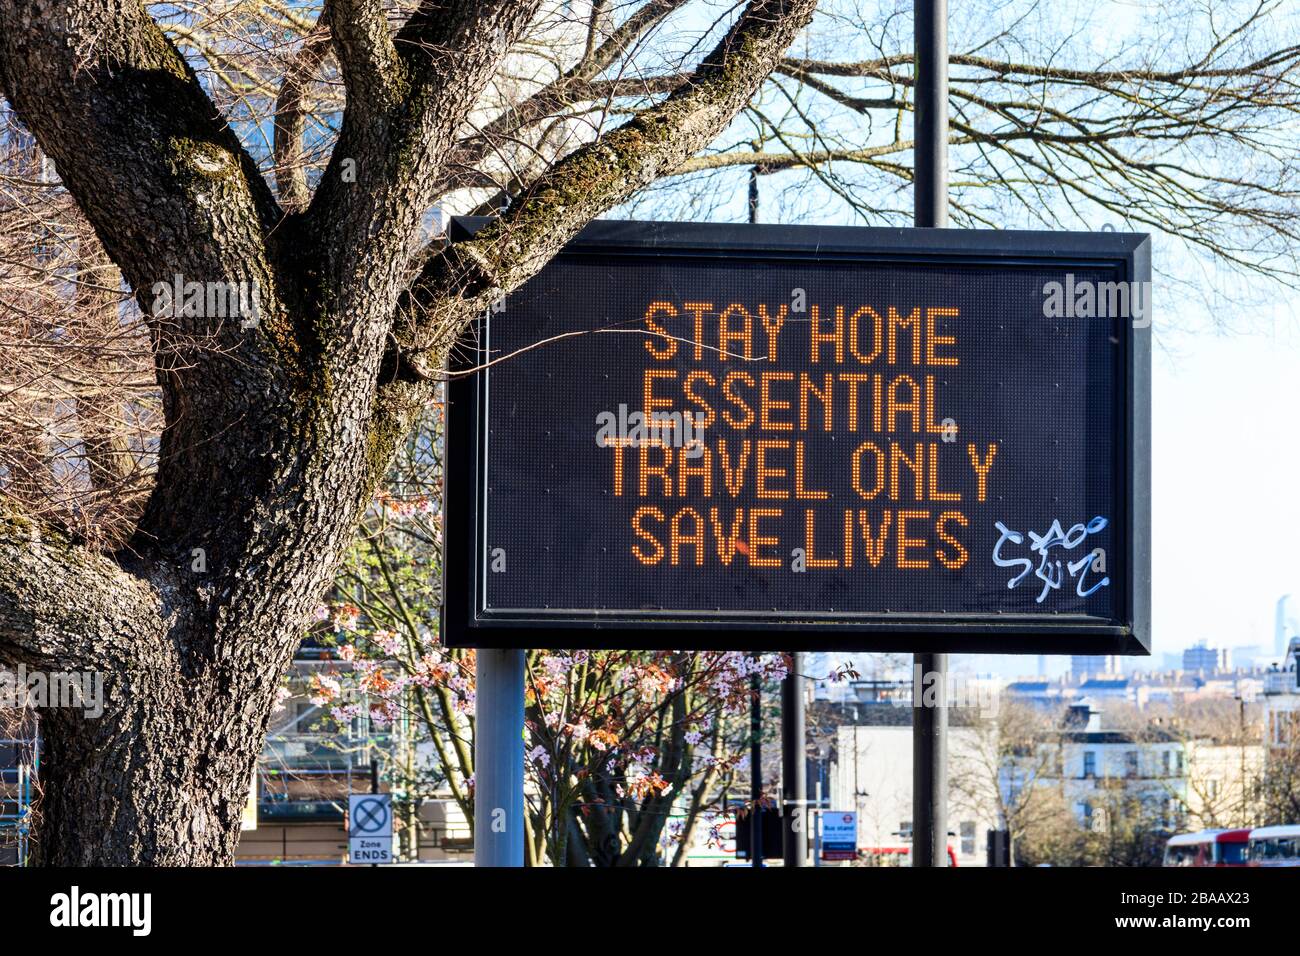 An illuminated dot matrix traffic sign reading 'stay home, essential travel only saves lives' during the coronavirus pandemic, London, UK Stock Photo